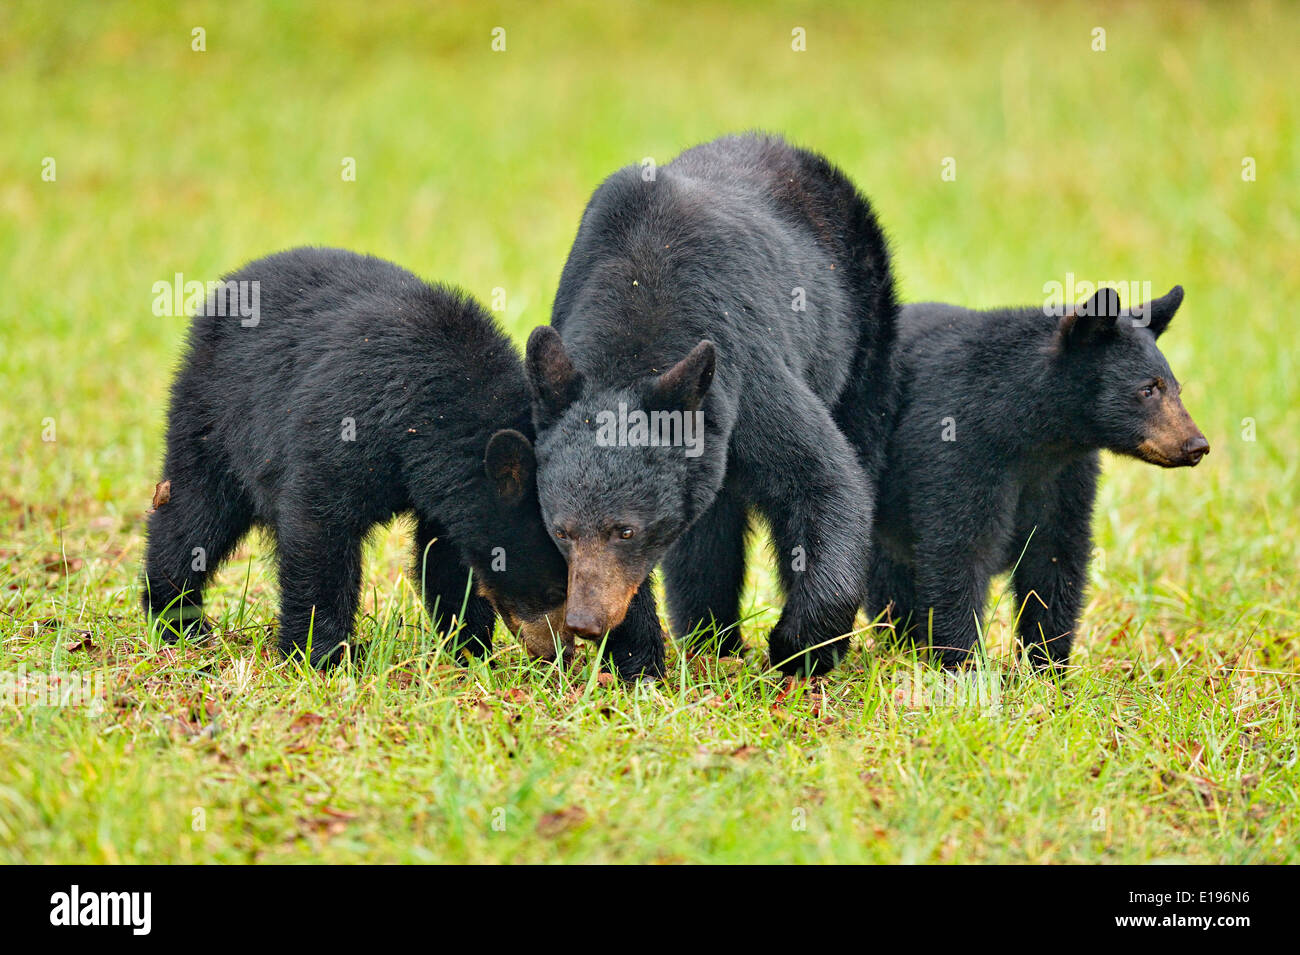 Black bear (Ursus americanus) Mother and cubs foraging for fallen fruit Great Smoky Mountains National Park, Tennessee USA Stock Photo